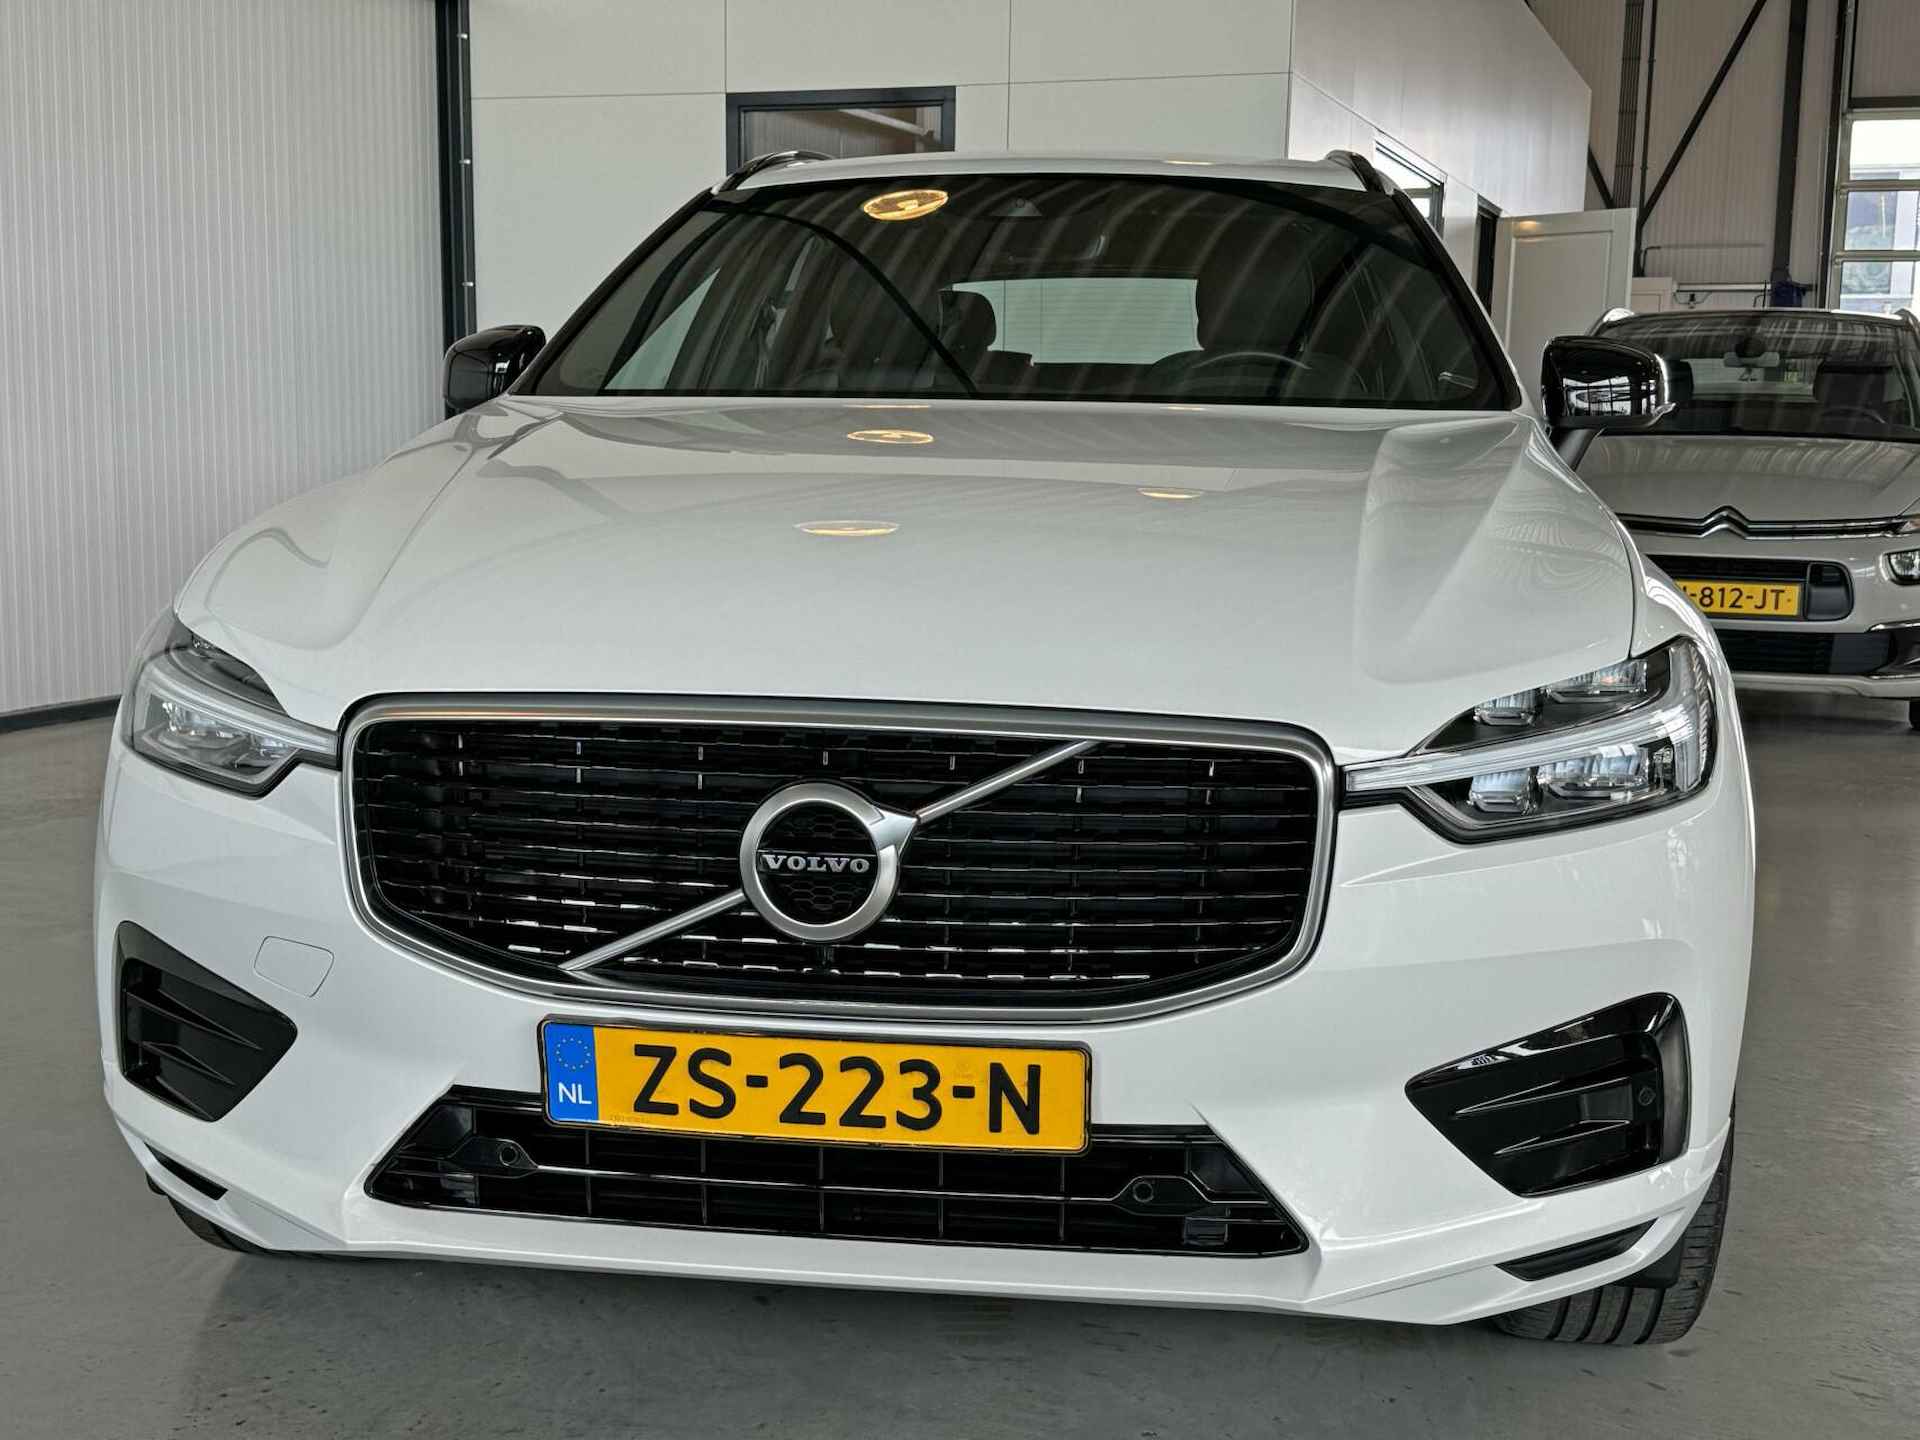 Volvo XC60 2.0 T5 184Kw AWD R-Design Geartronic Inscription Plus|Luchtvering - 6/44